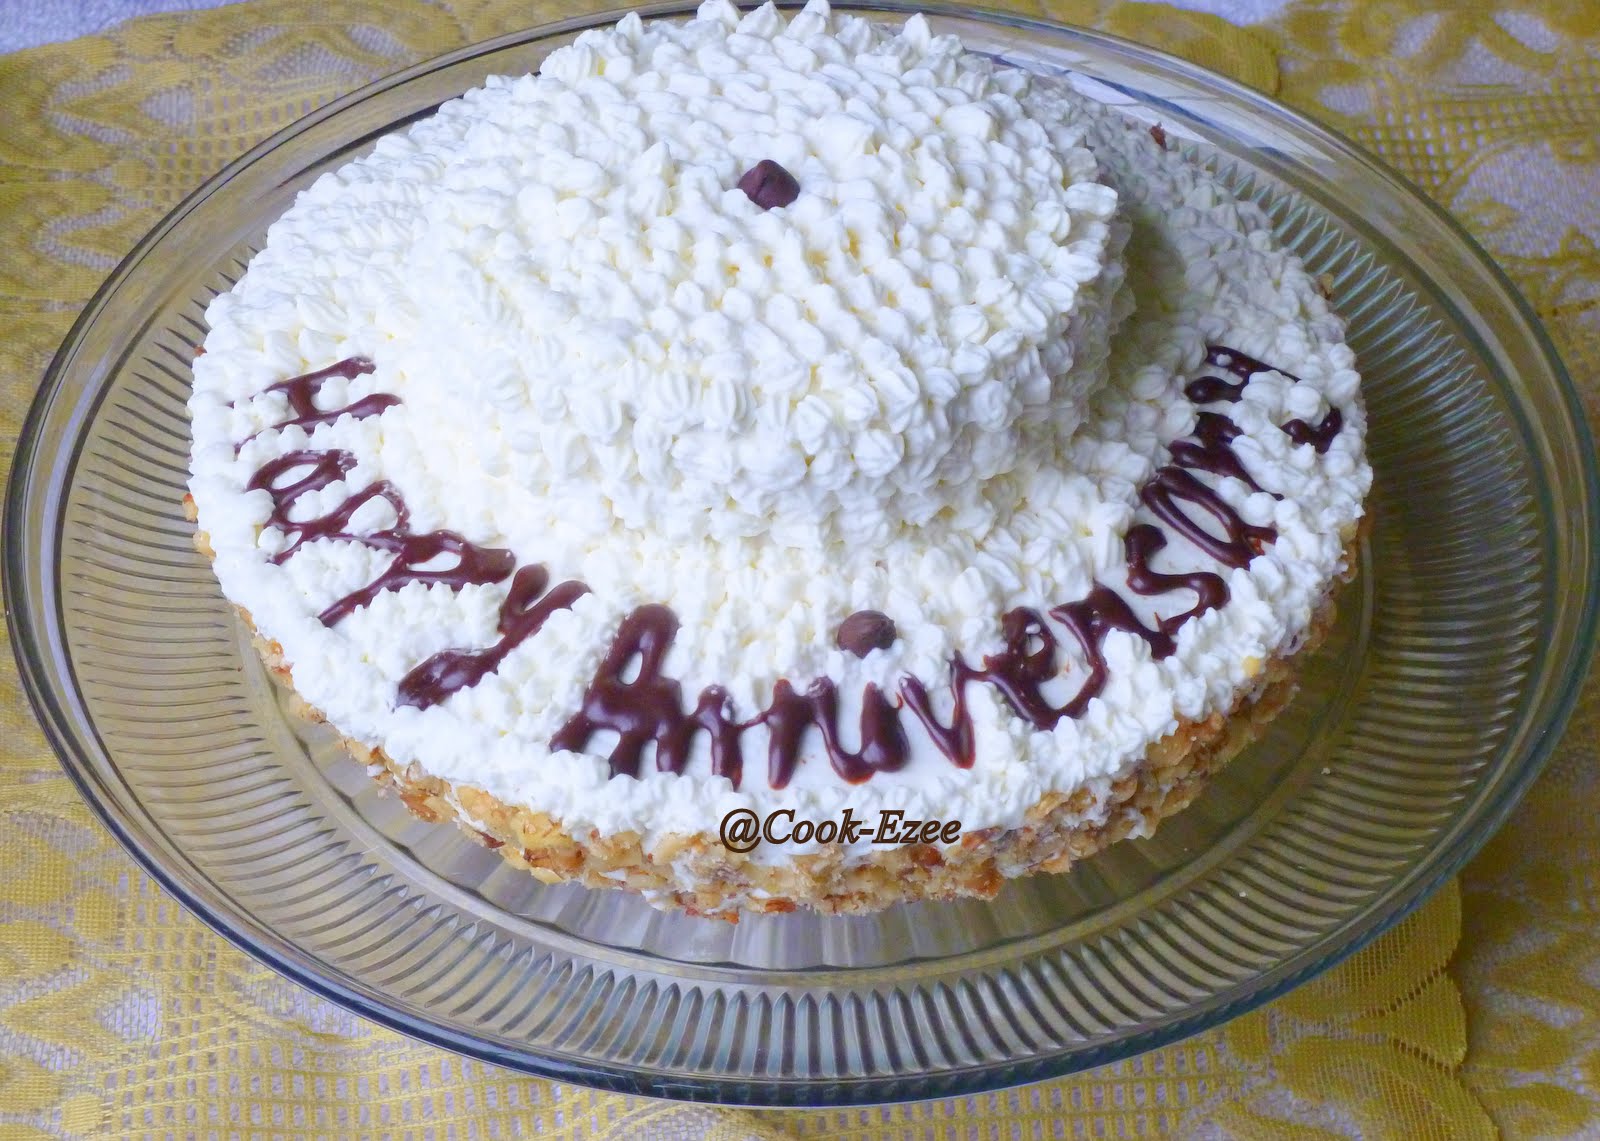 ... Mocha Cake with Whipped Cream Frosting - A Wedding Anniversary Cake